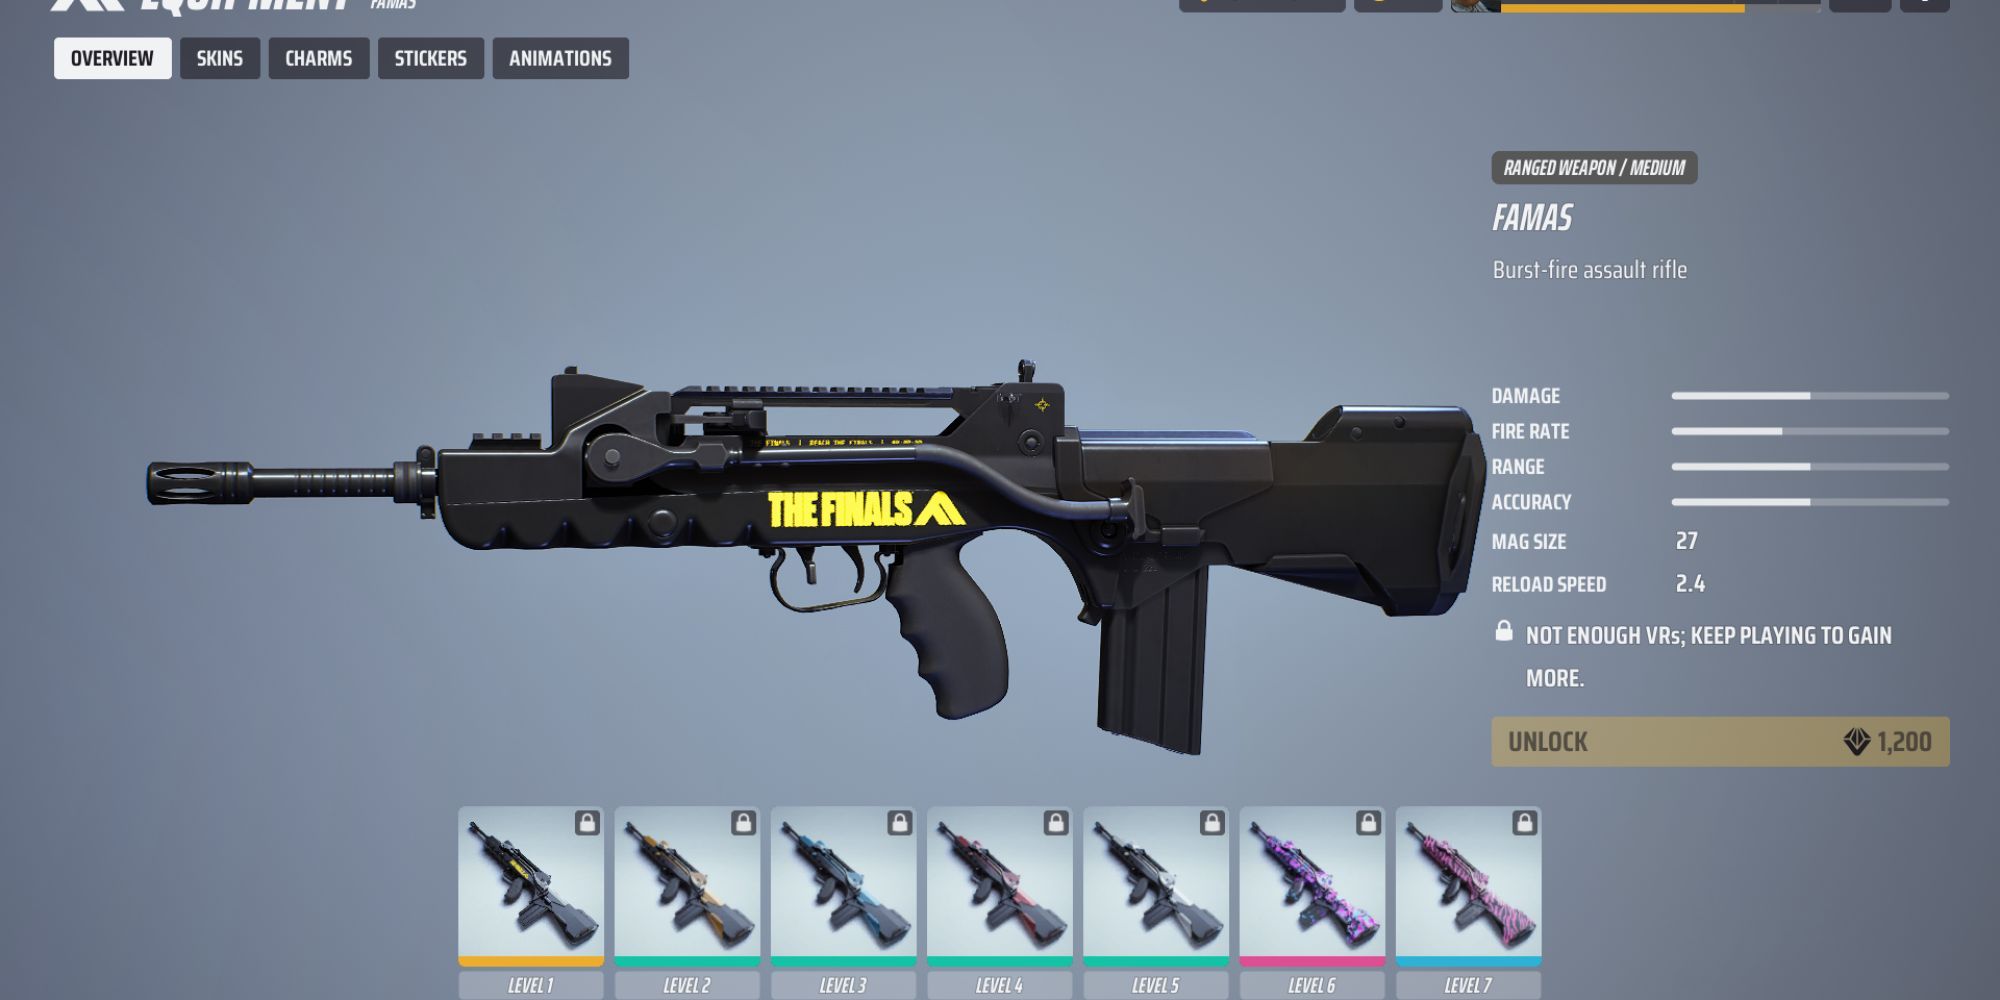 Best weapons for Medium builds in The Finals - FAMAS